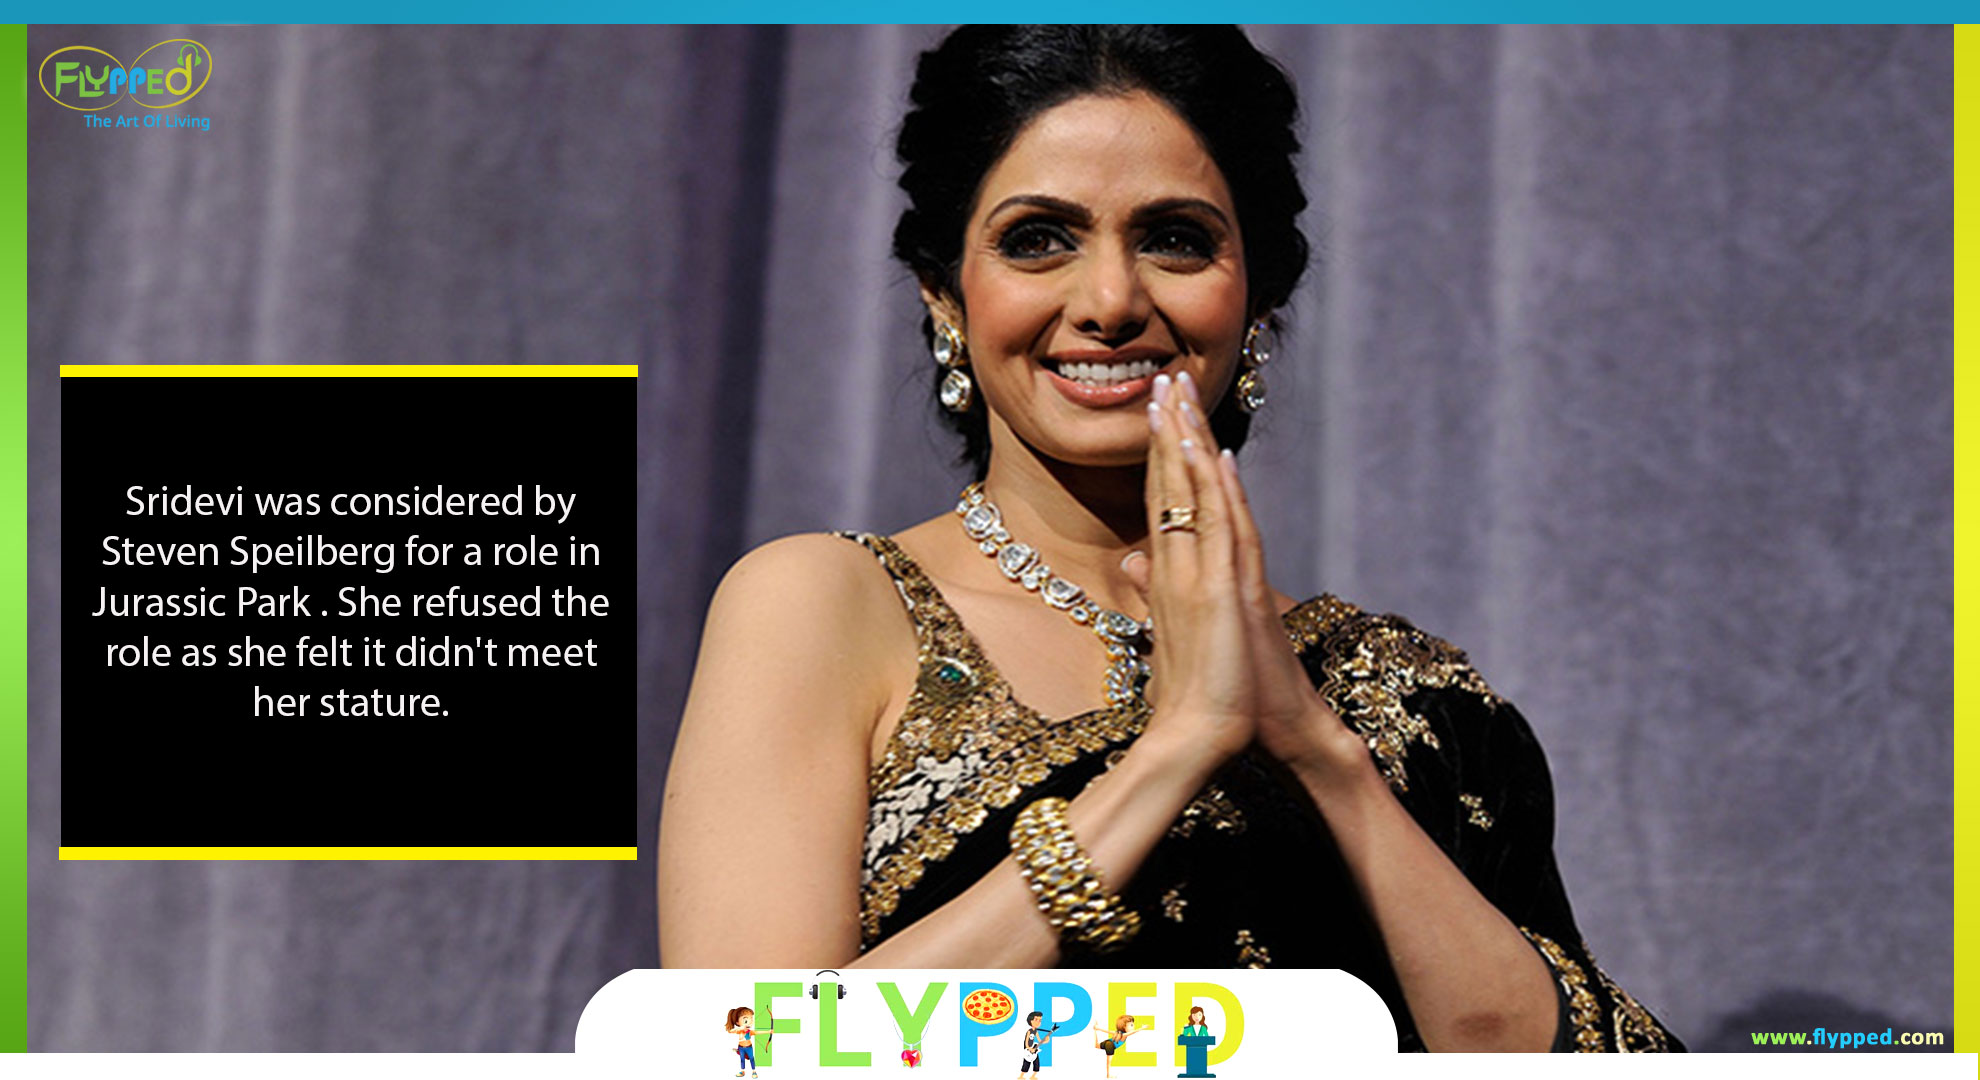 10-Interesting-facts-we-bet-you-didn't-know-about-Sridevi5